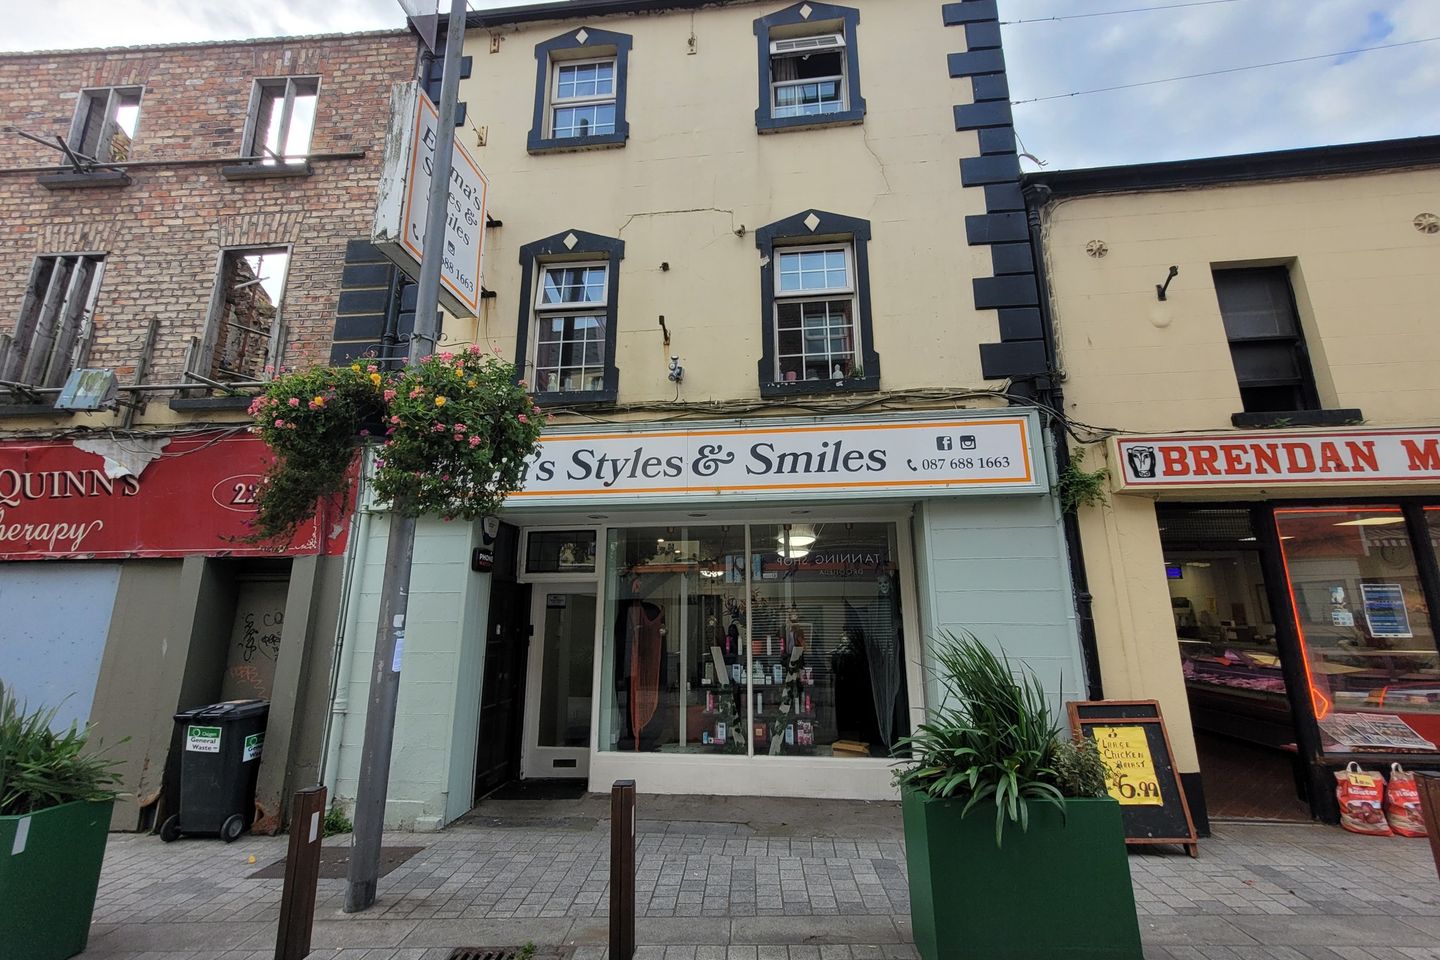 2 BED APARTMENT & RETAIL UNIT AT 53 Narrow West Street, Drogheda, Co. Louth, A92Y940